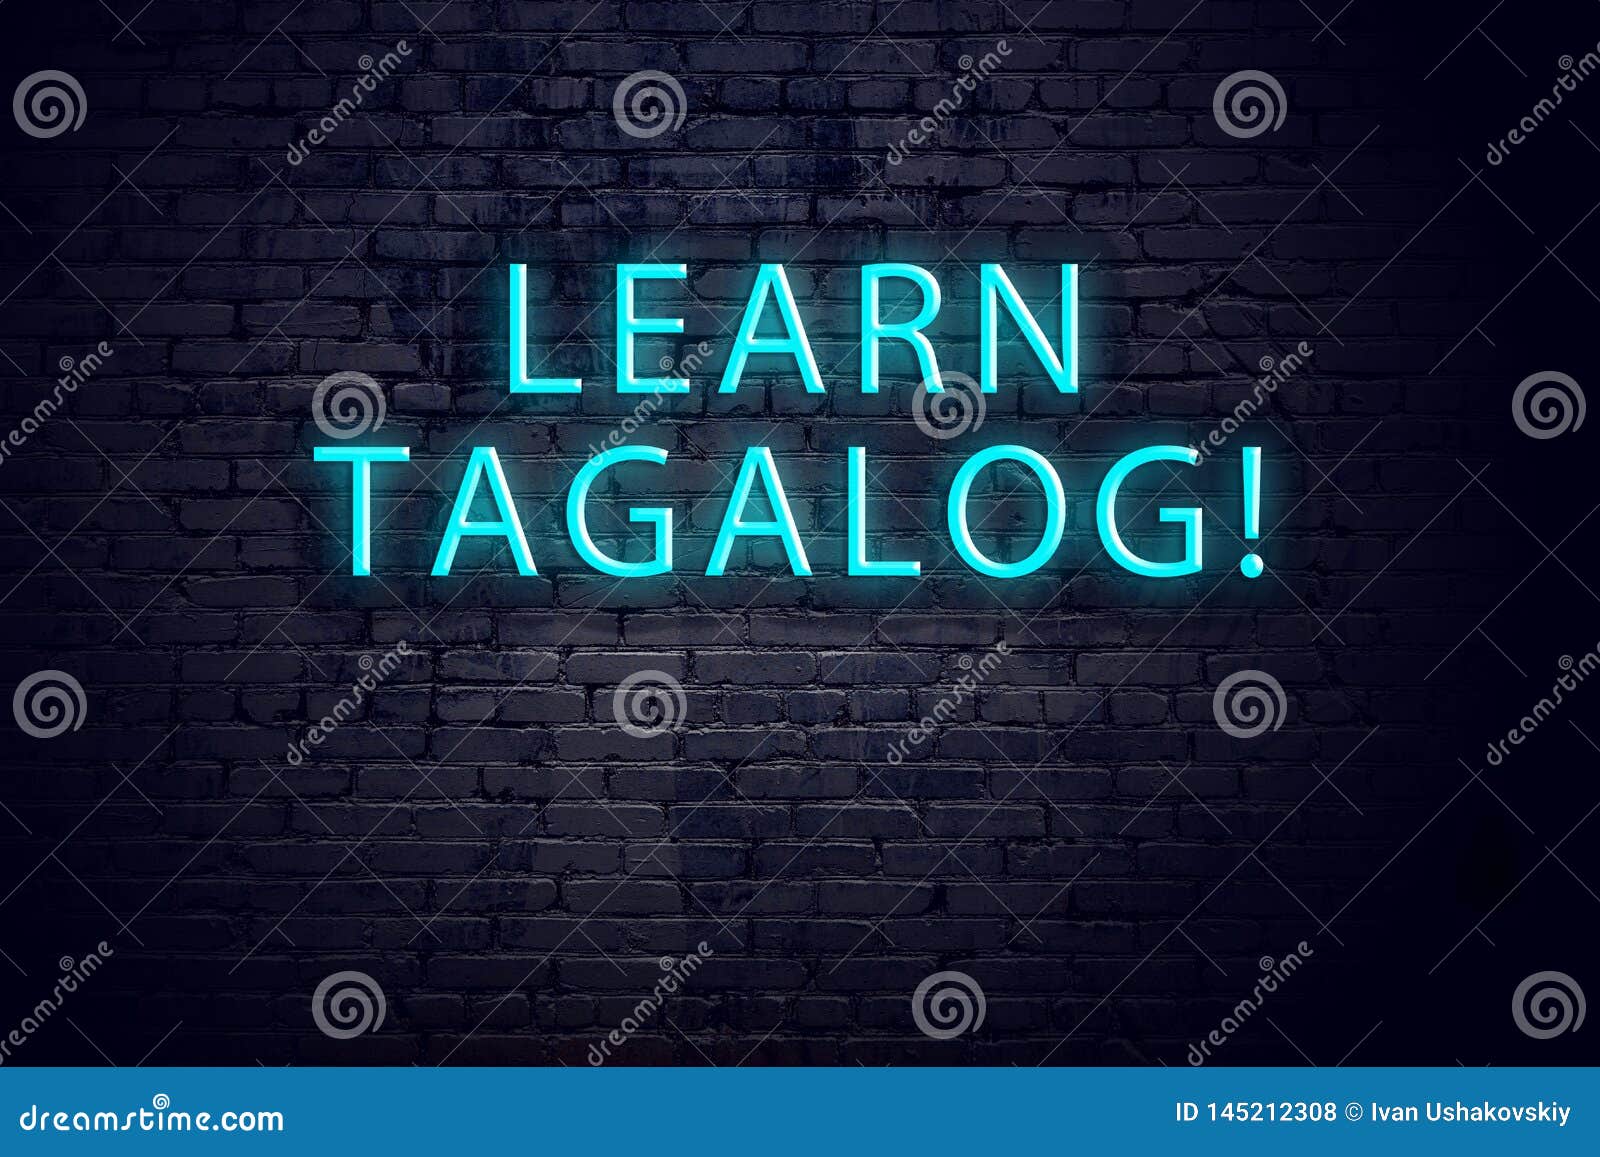 brick wall and neon sign with inscription. concept of learning tagalog